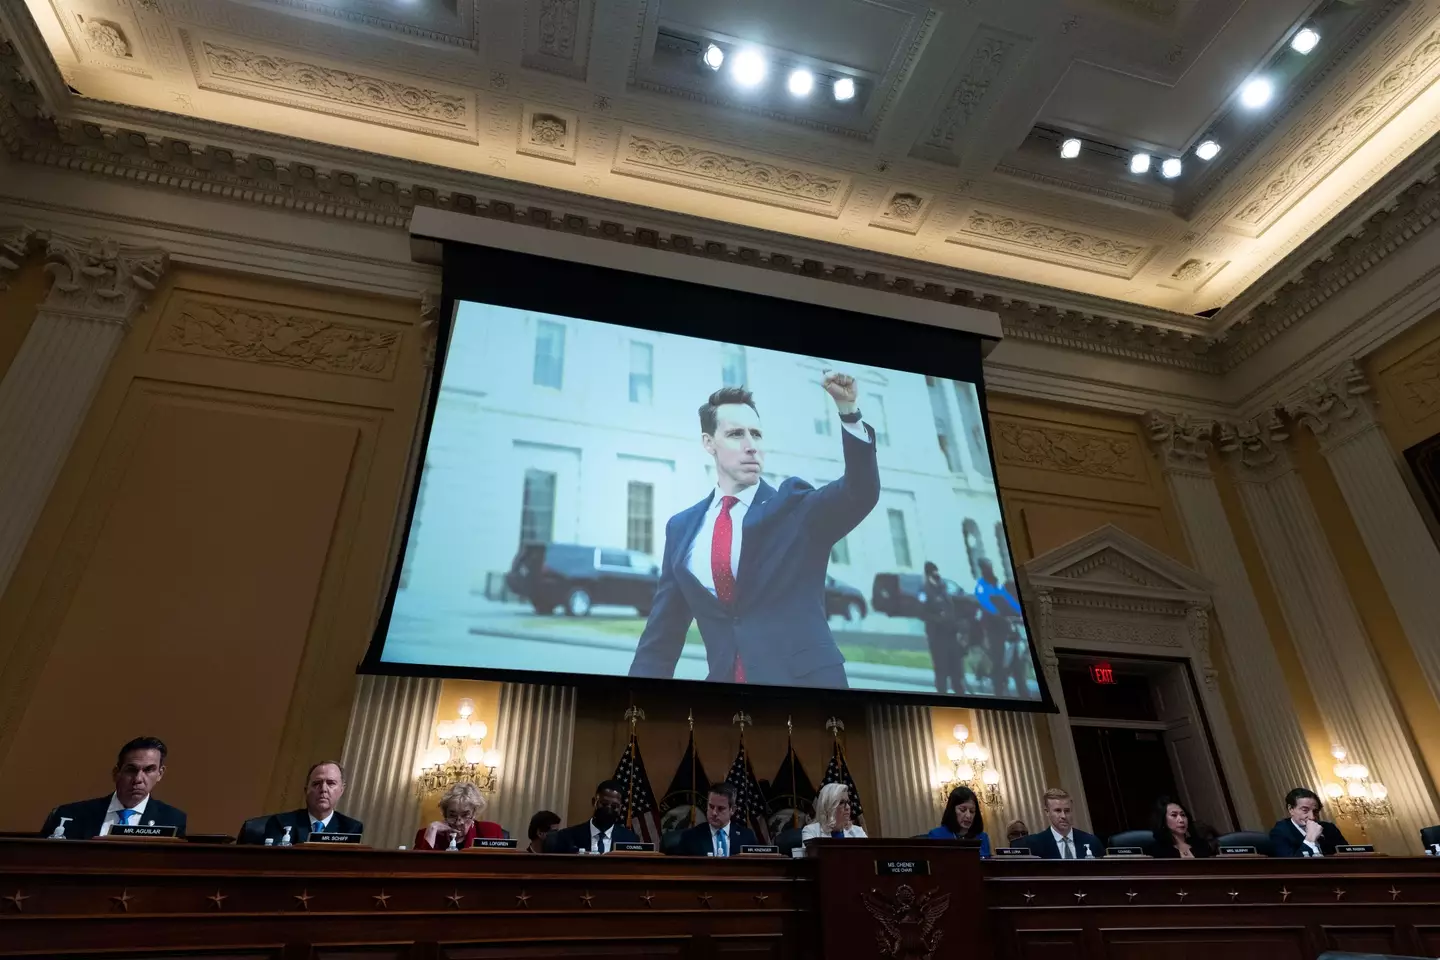 The January 6 Committee were first shown the photo of Josh Hawley fist pumping the air with crowds outside the Capitol.